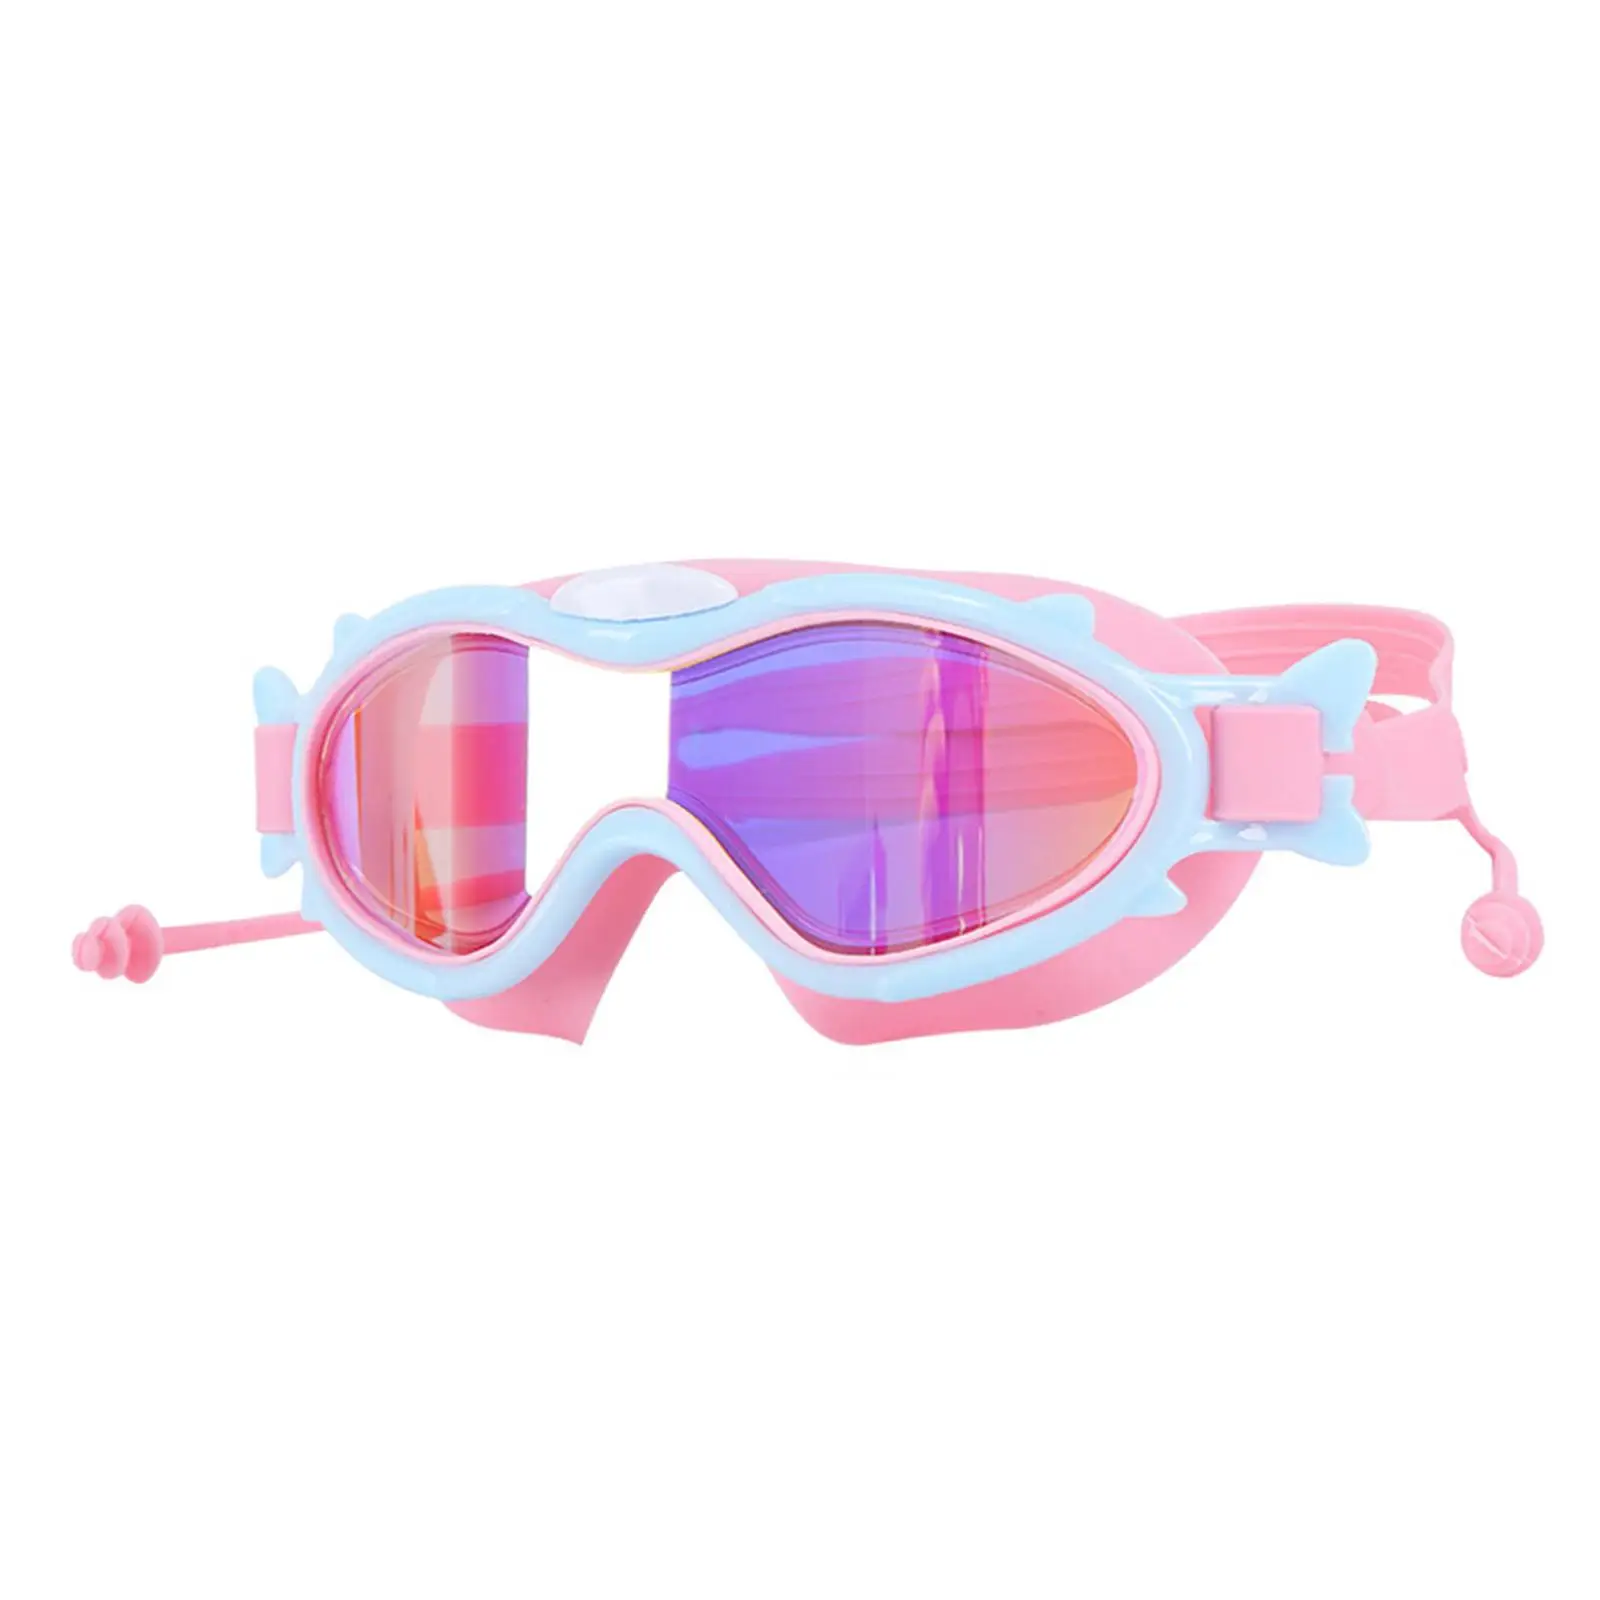 Kids Swimming Goggles with Ear Swim Goggles for Kids 6-14 Boys Girls Blue Pink